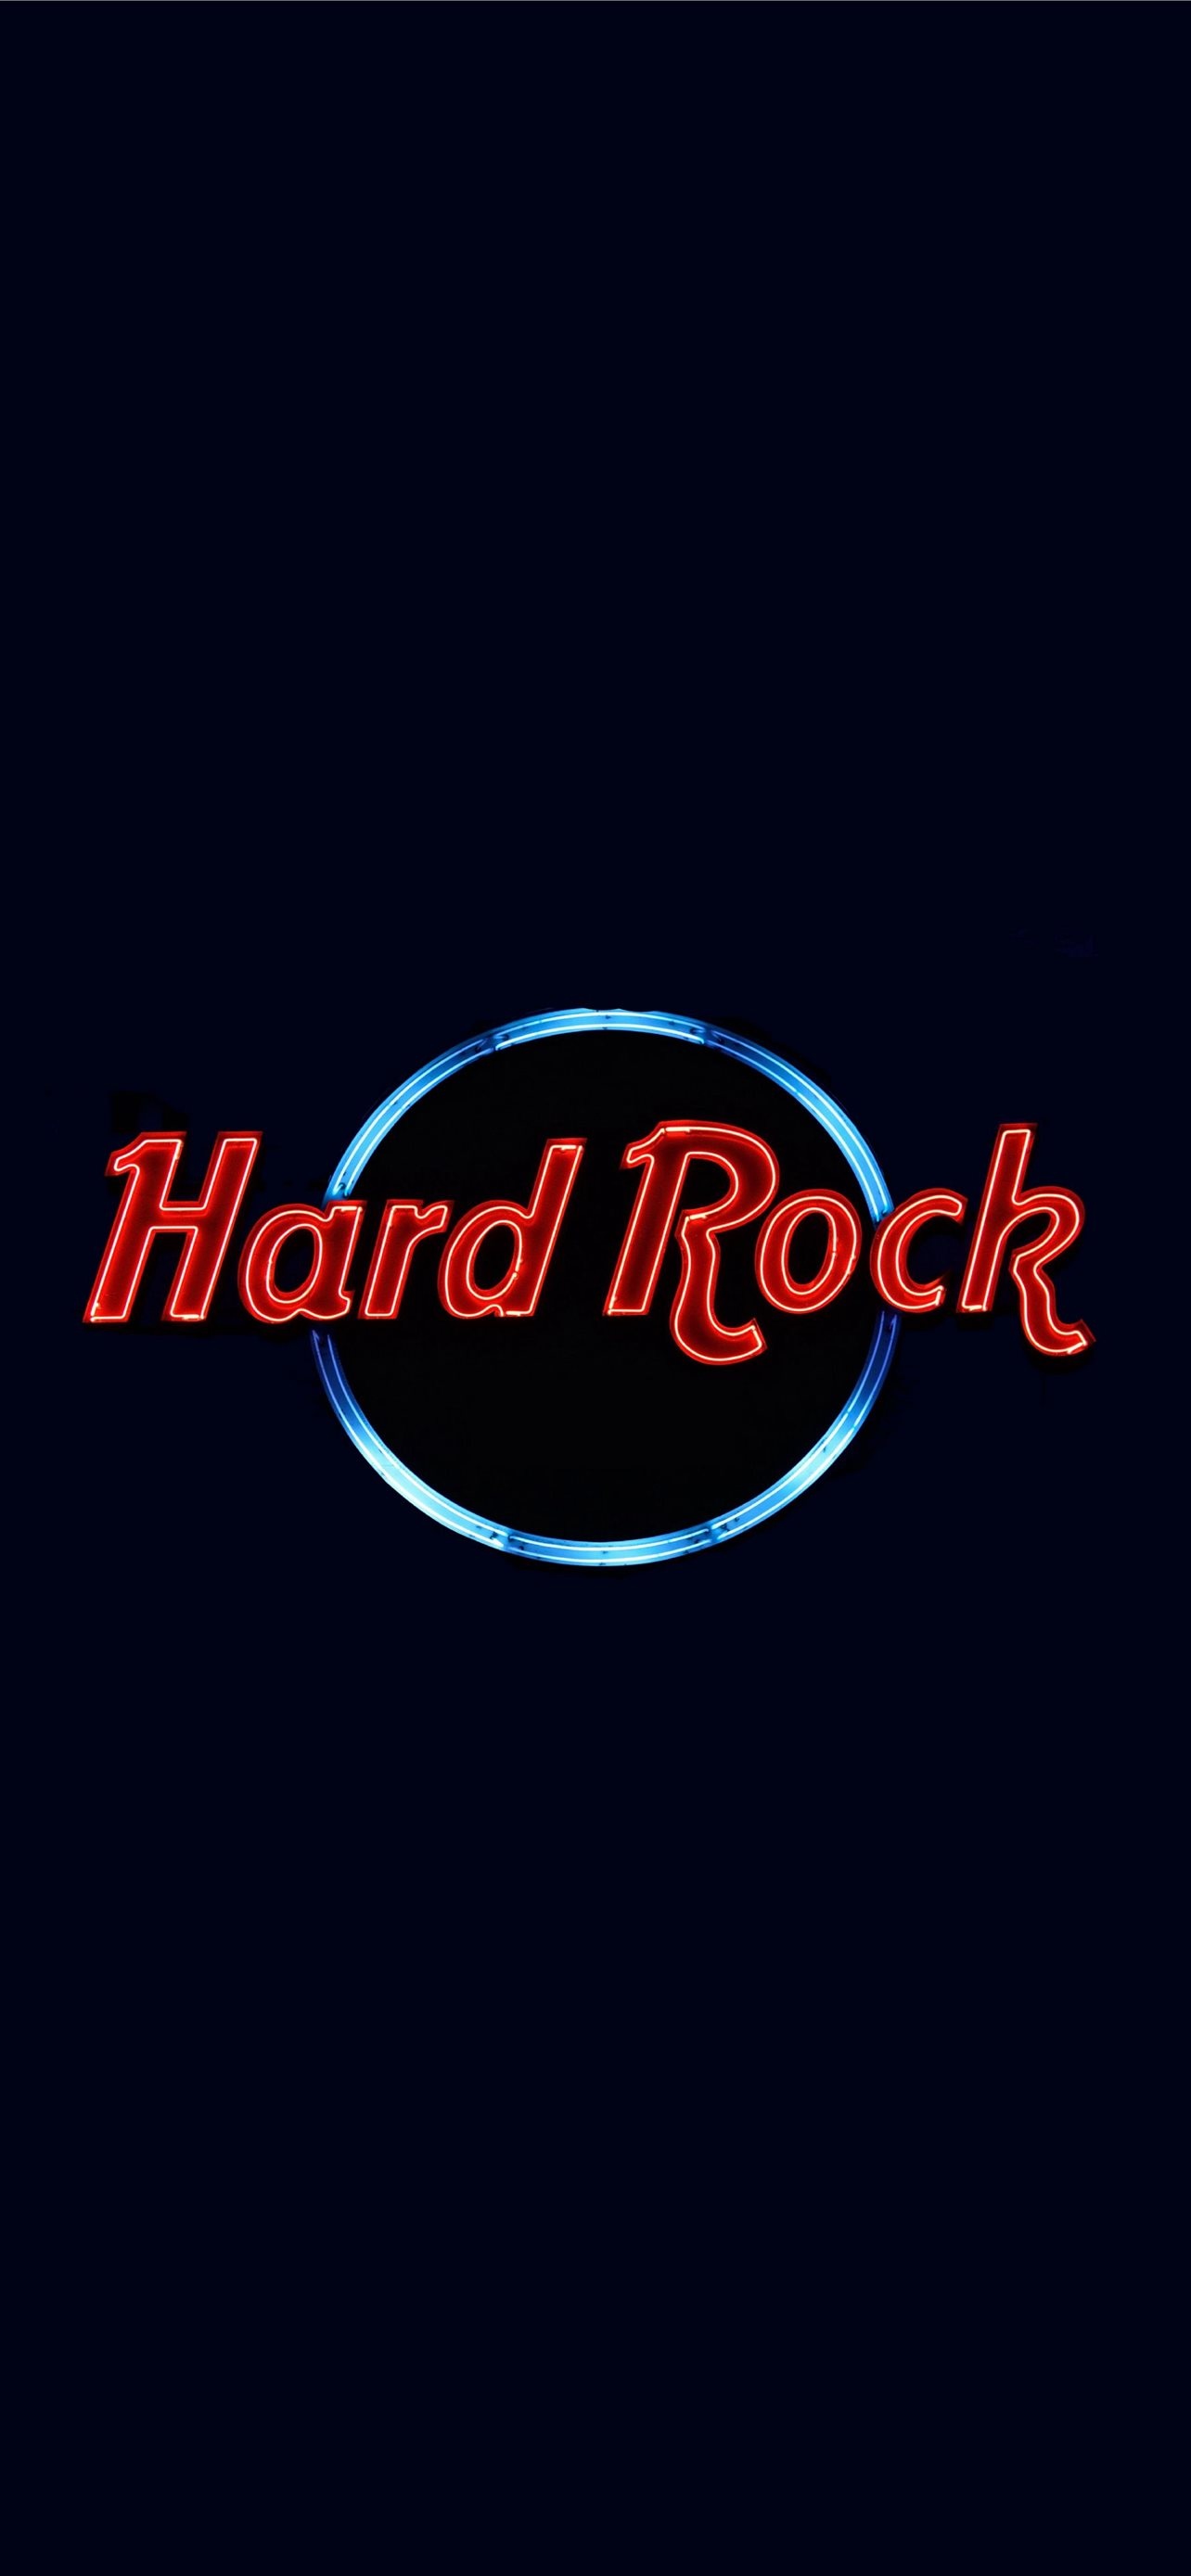 Hard rock wallpapers, iPhone rock aesthetics, Rock music passion, Mobile inspiration, 1290x2780 HD Phone